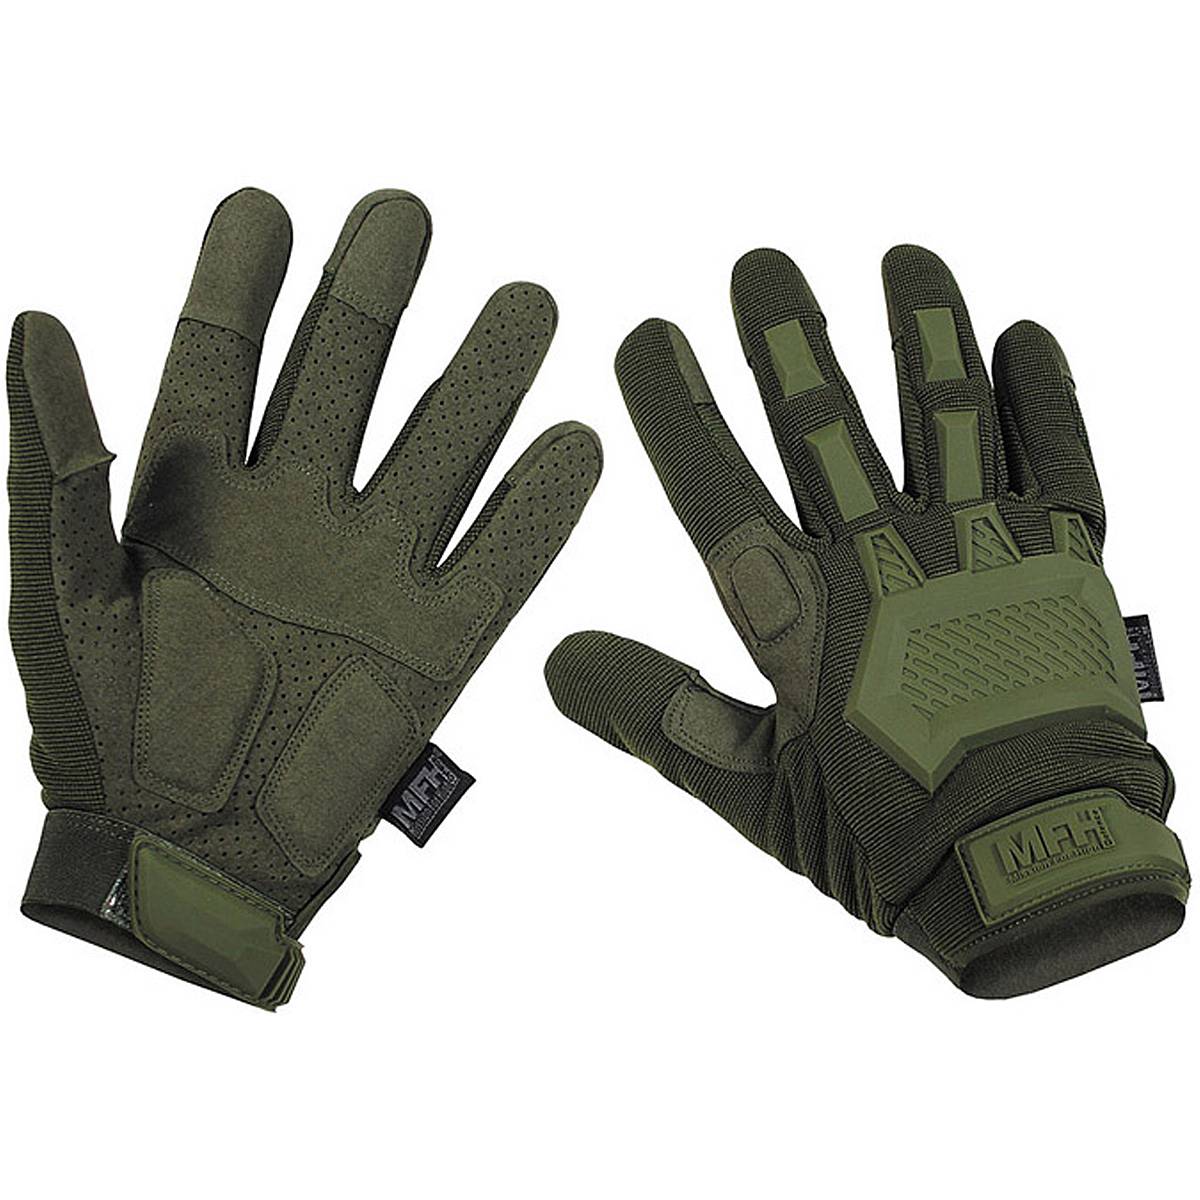 Mechanix Handschuhe Classic Material 4X Tactical KSK Allround Army Gloves 